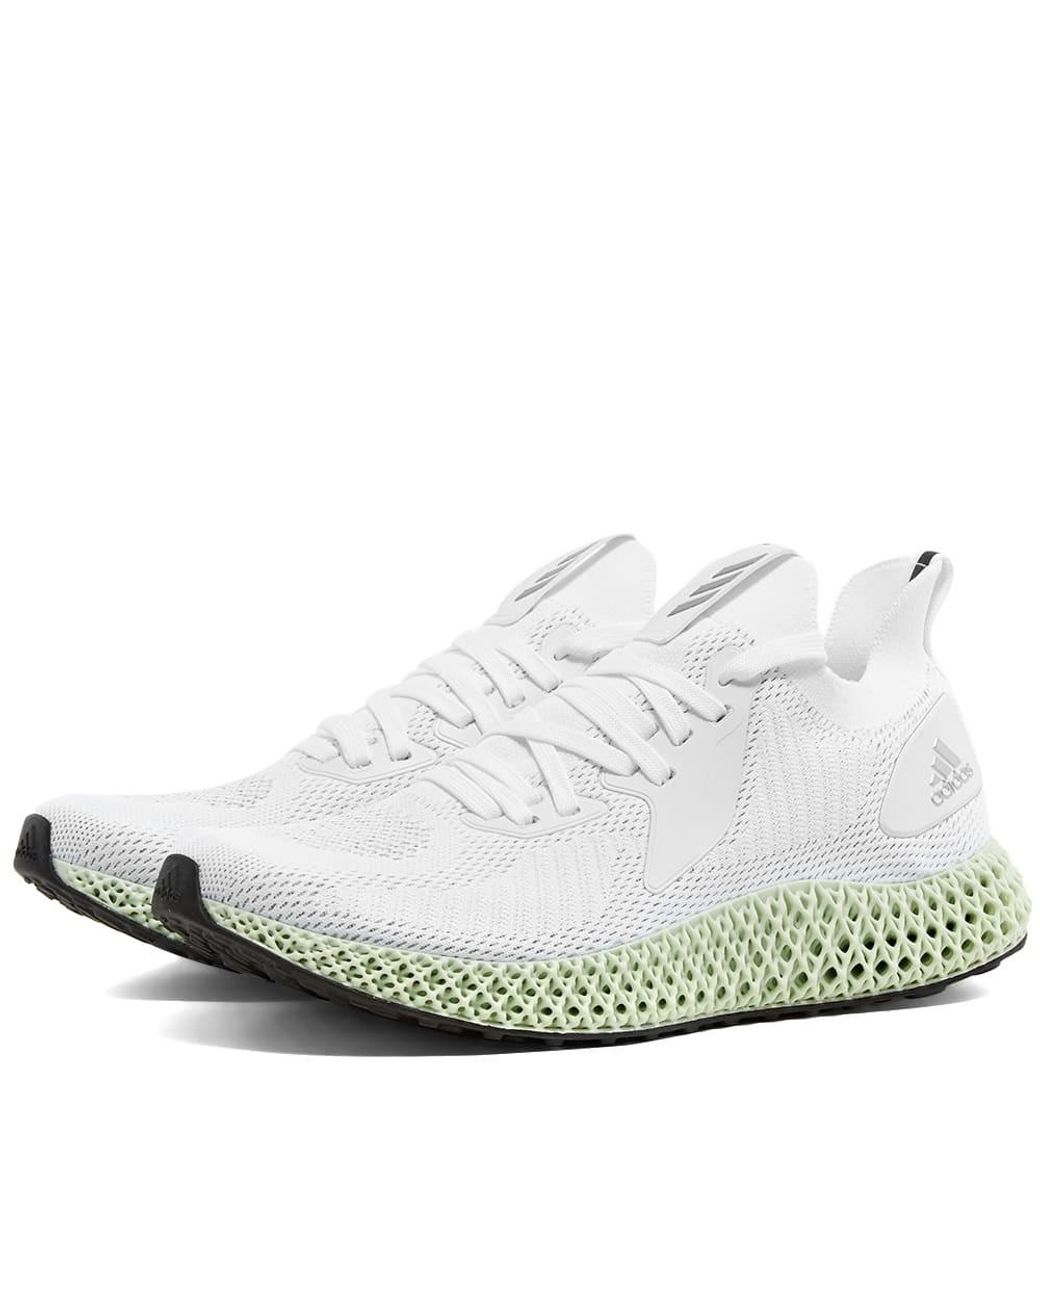 adidas Alphaedge 4d Parley in White for Men - Lyst